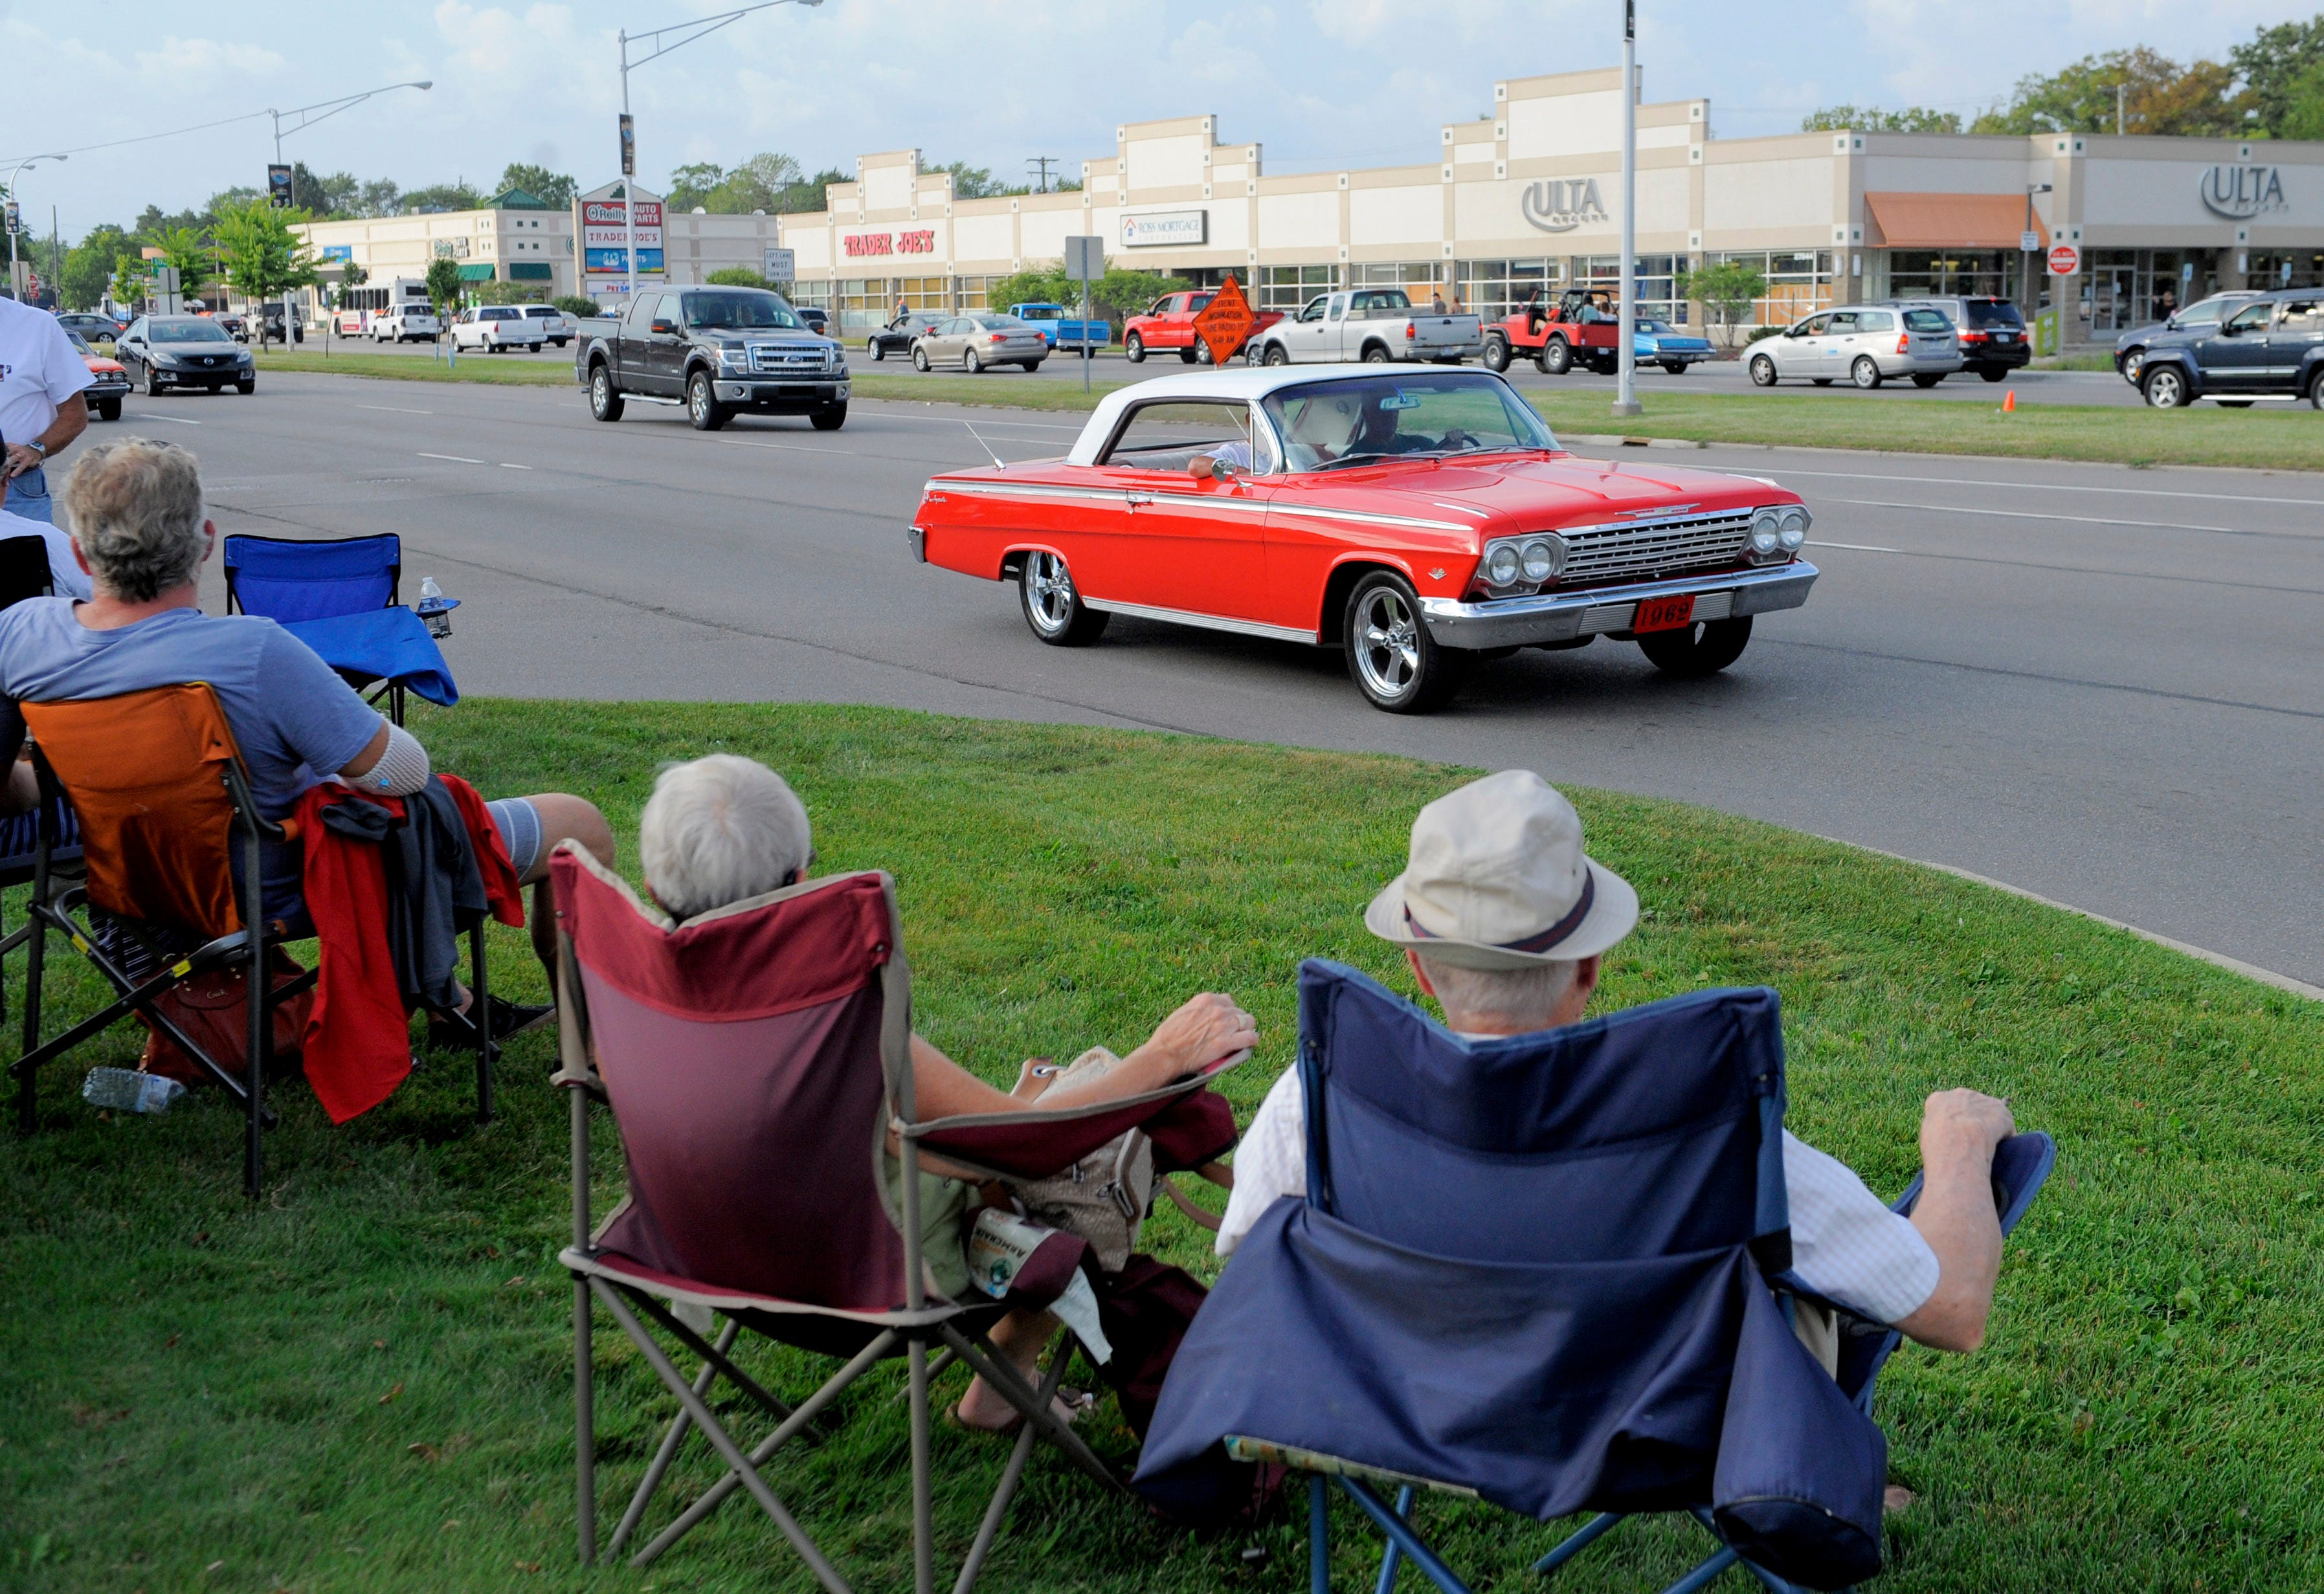 A 1962 Chevrolet Impala passes by several spectators, Friday Aug. 14, 2015, on Woodward near 11 Mile in Royal Oak.